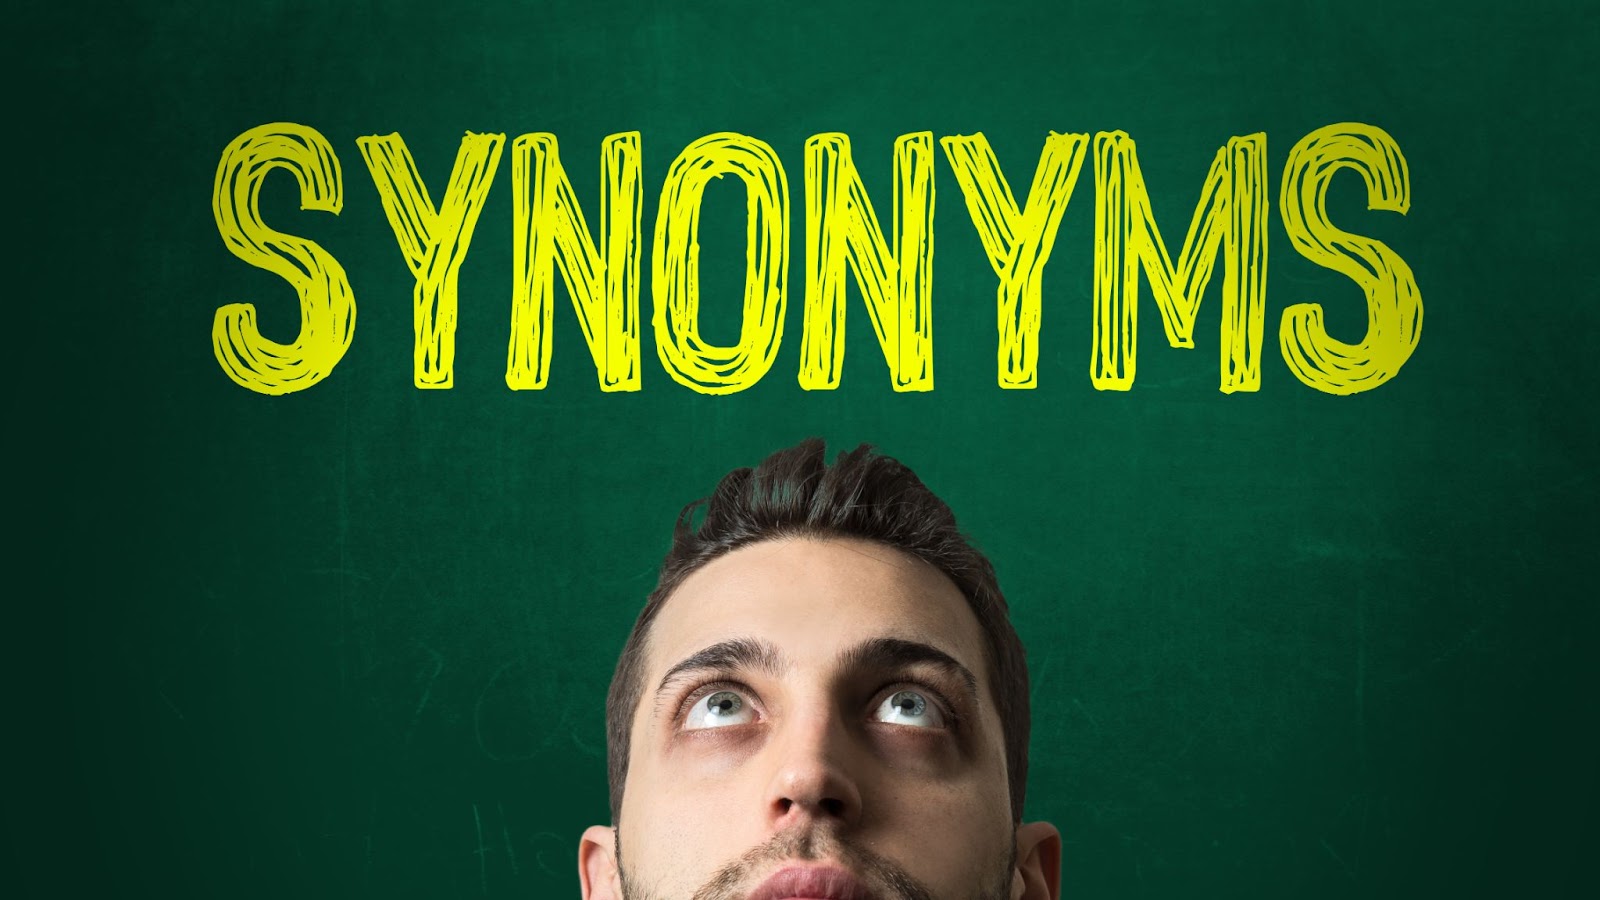 Most Common Synonym Words